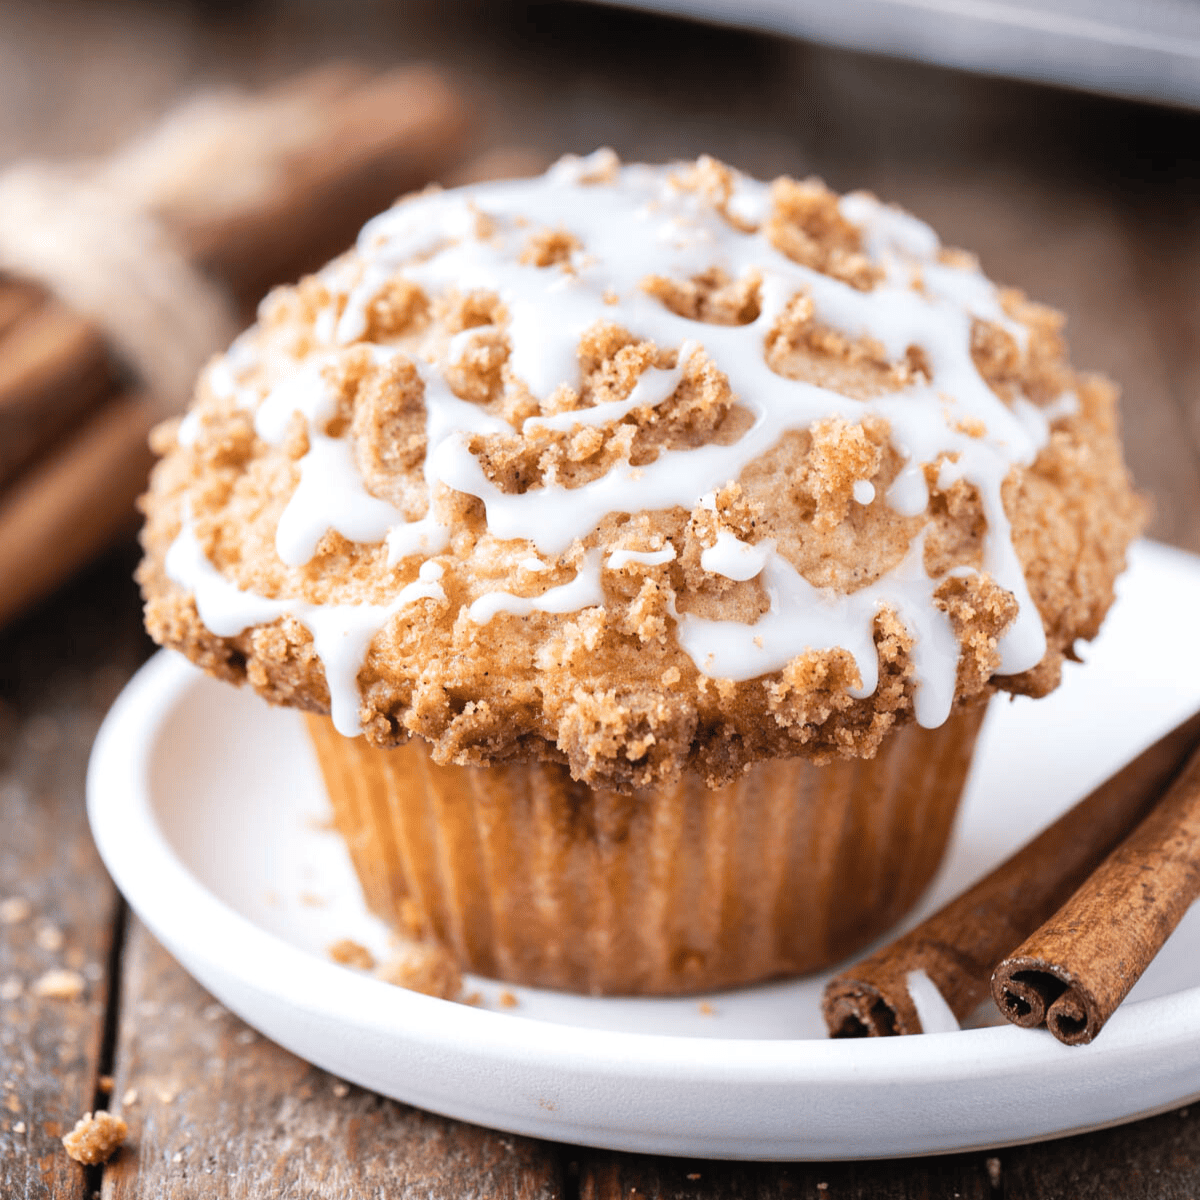 https://thefirstyearblog.com/wp-content/uploads/2021/02/Coffee-Cake-Muffins-2023-Square.png